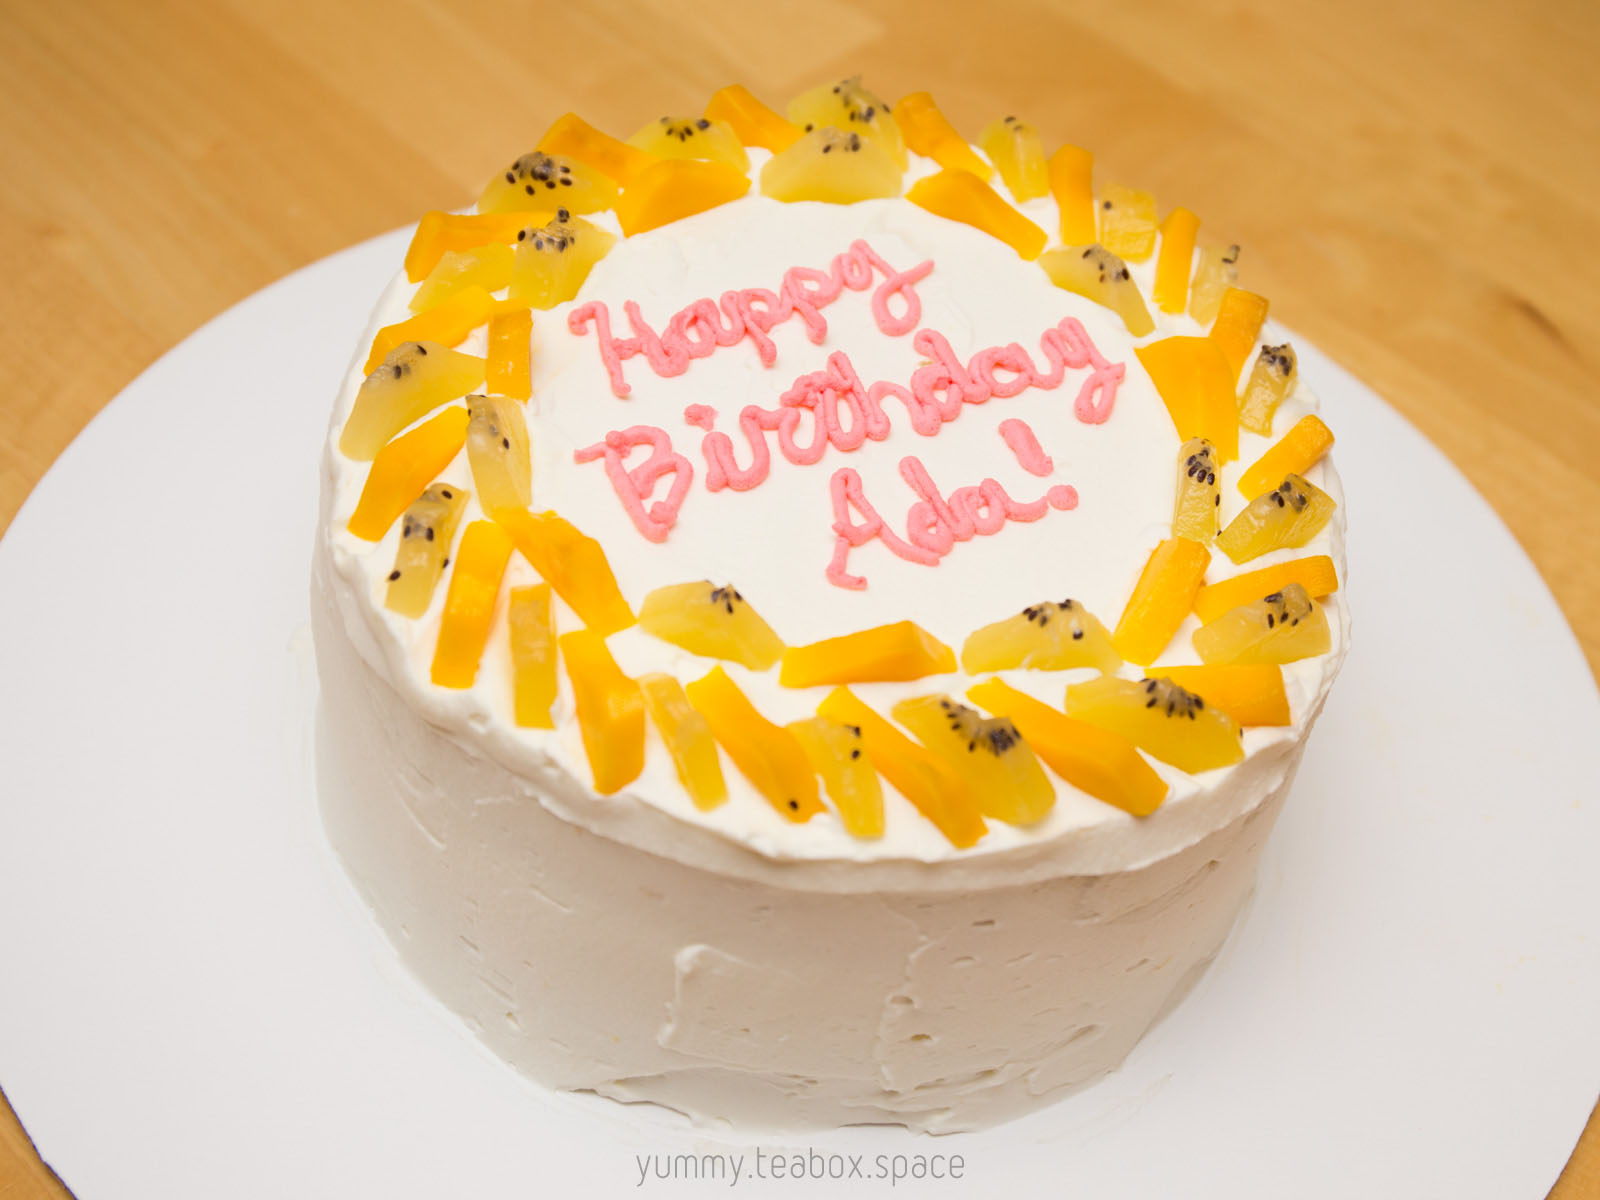 Round white cake with whipped cream frosting and a border of kiwi and mango. The center says Happy Birthday Ada.